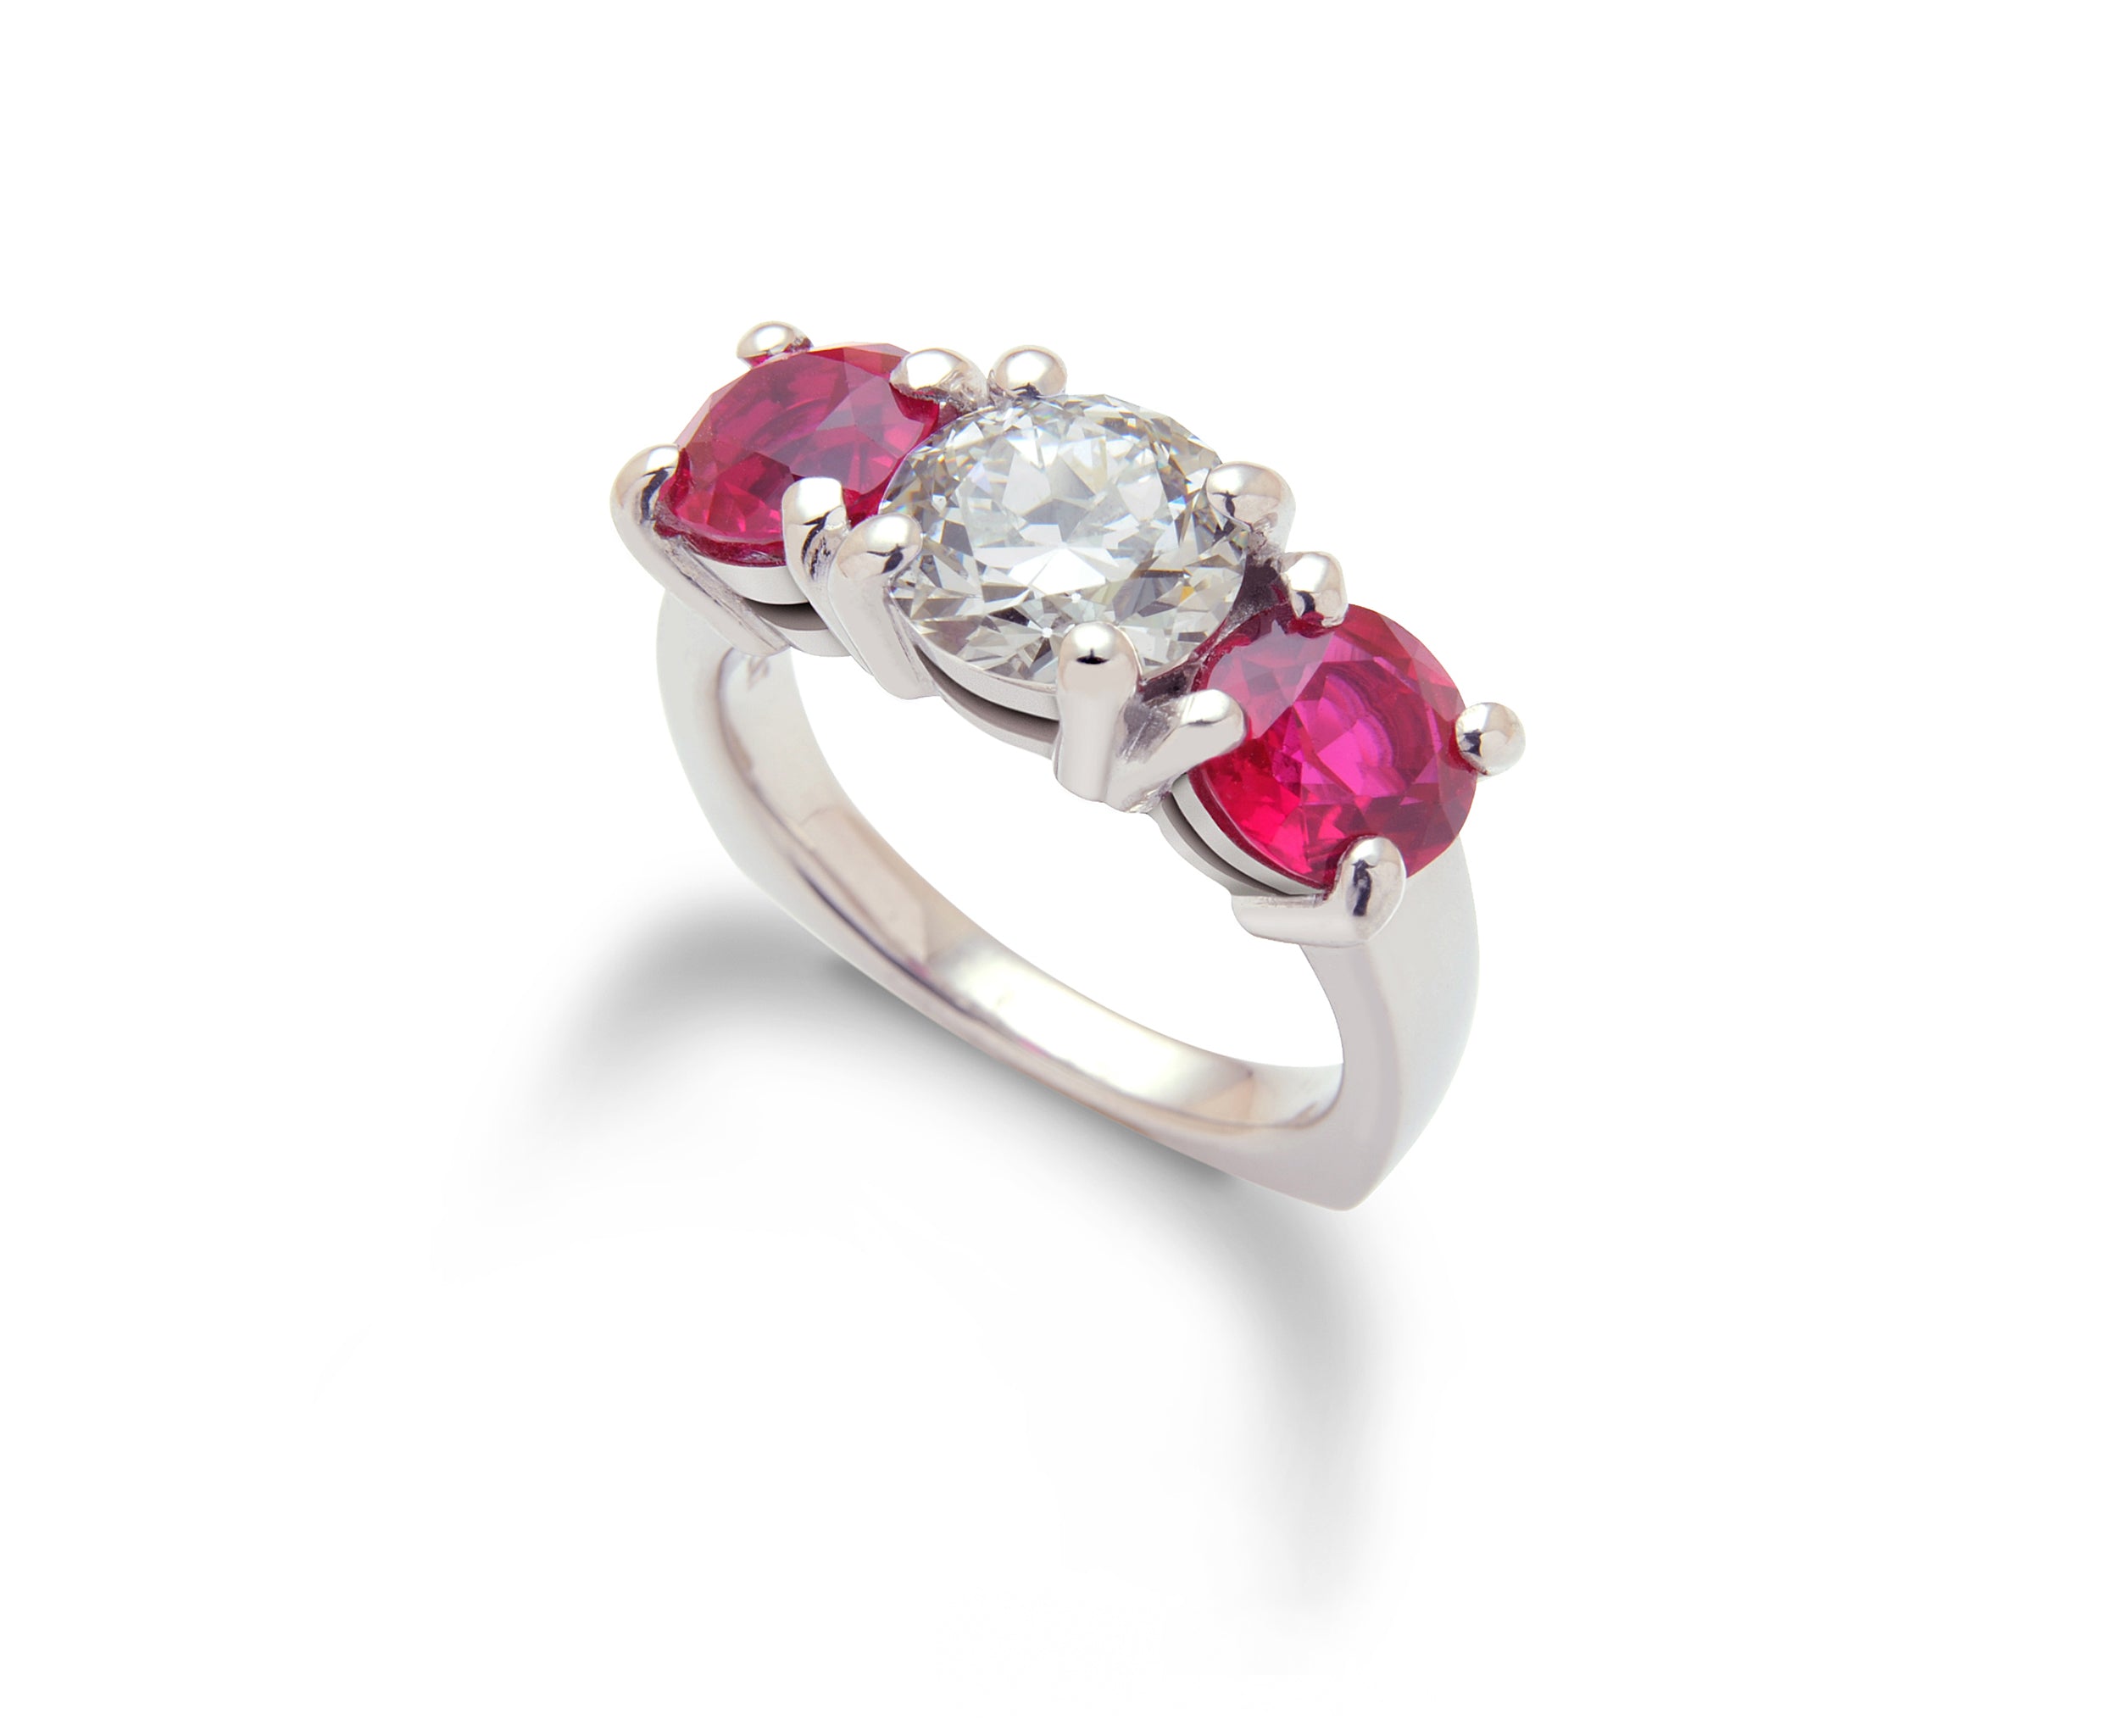 Two carat Diamond ring with large Rubies